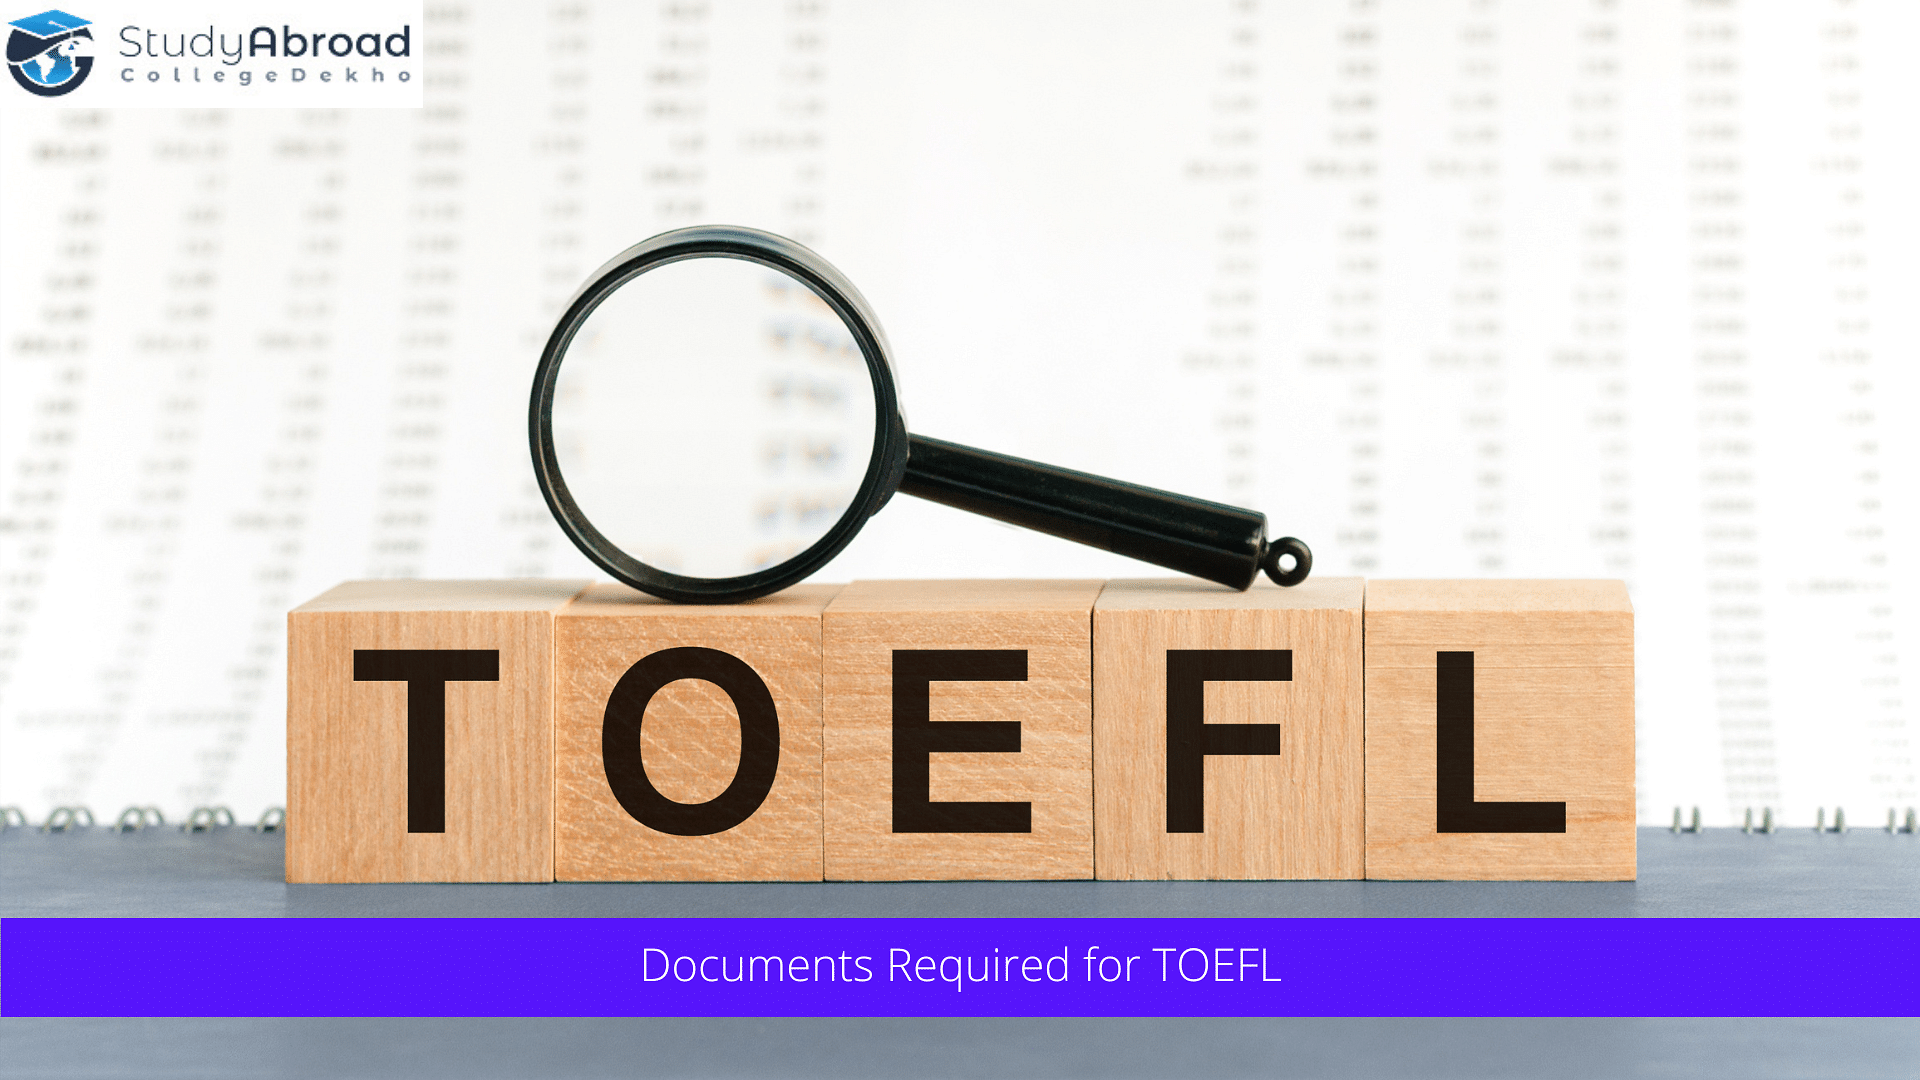 Documents Required for TOEFL